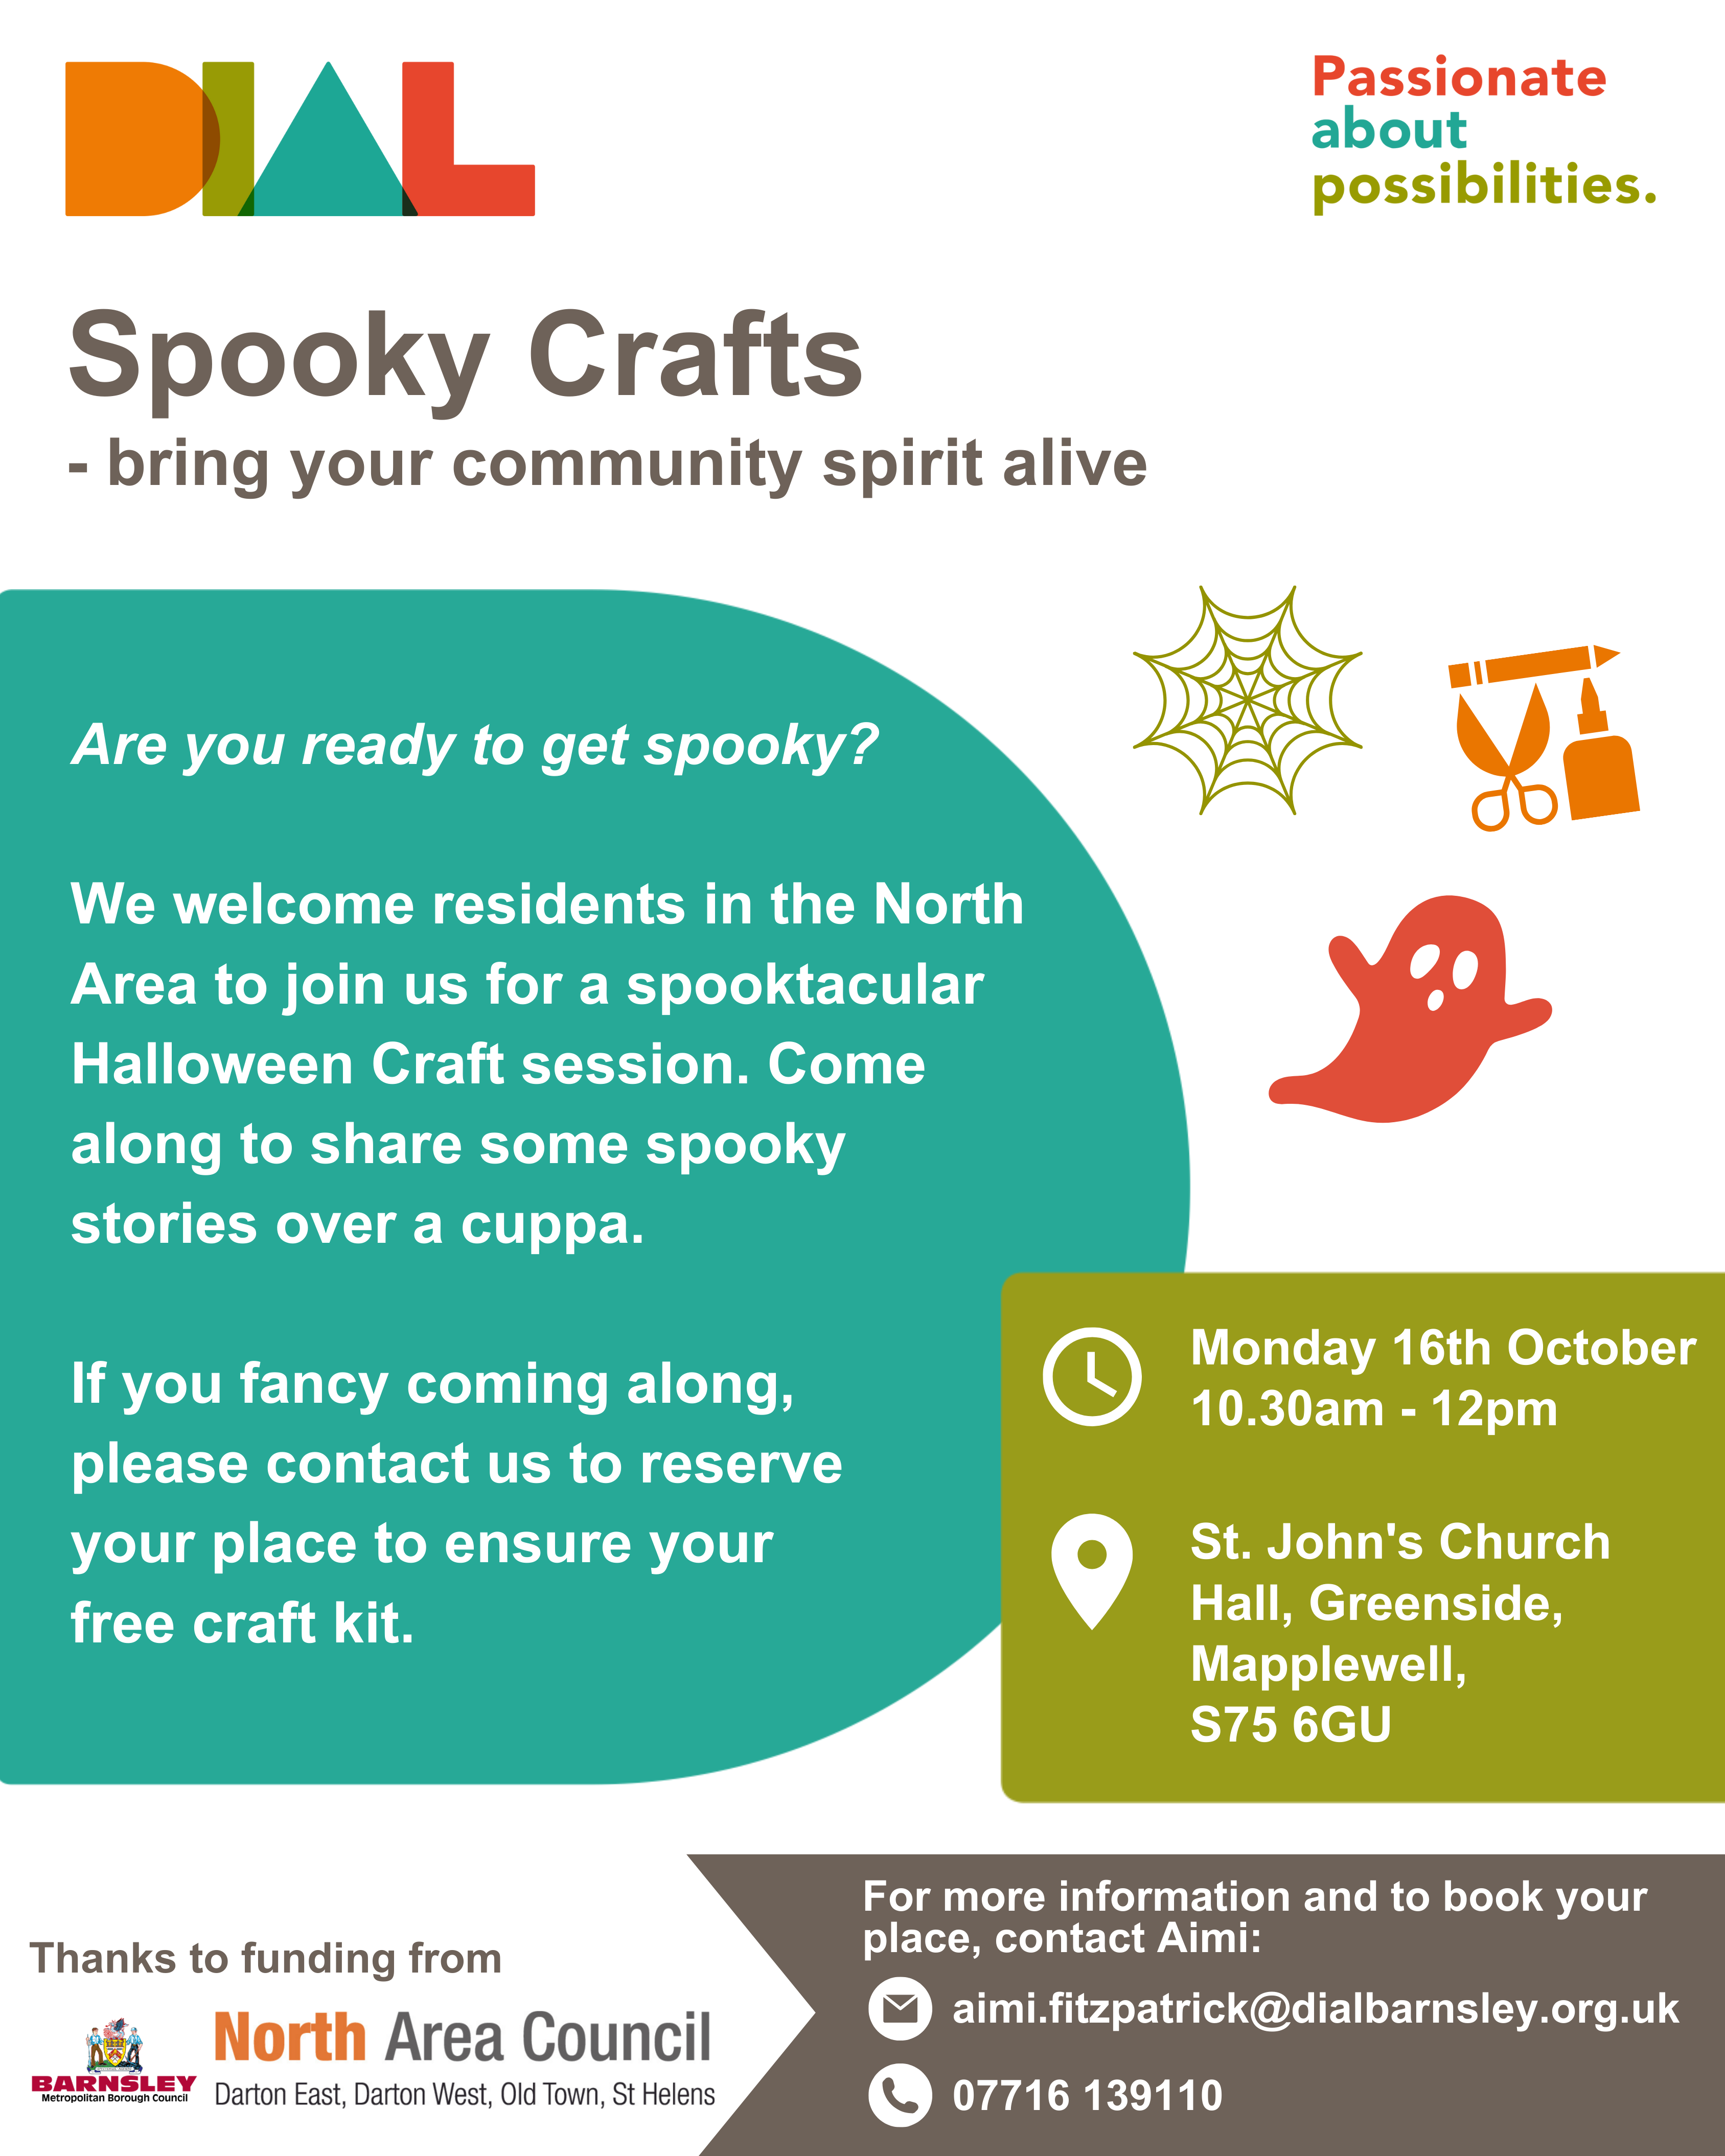 A poster with a white background, with DIAL branding of orange, green, teal and red. It includes line art icons of a picnic basket, sunshine and a selection of photographs.The poster reads: Spooky Crafts - bring your community spirit alive. Are you ready to get spooky? We welcome residents in the North Area to join us for a spooktacular Halloween Craft session. Come along to share some spooky stories over a cuppa. If you fancy coming along, please contact us to reserve your place to ensure your free craft kit.When: Monday 16th October, 10.30am - 12pm.
Where: St. John's Church Hall, Greenside, Mapplewell, S75 6GU.For more information and to book your place, contact Aimi by email at aimi.fitzpatrick@dialbarnsley.org.uk or by phone on 07716 139110.Thanks to funding from Barnsley Metropolitan Borough Council and North Area Council. 